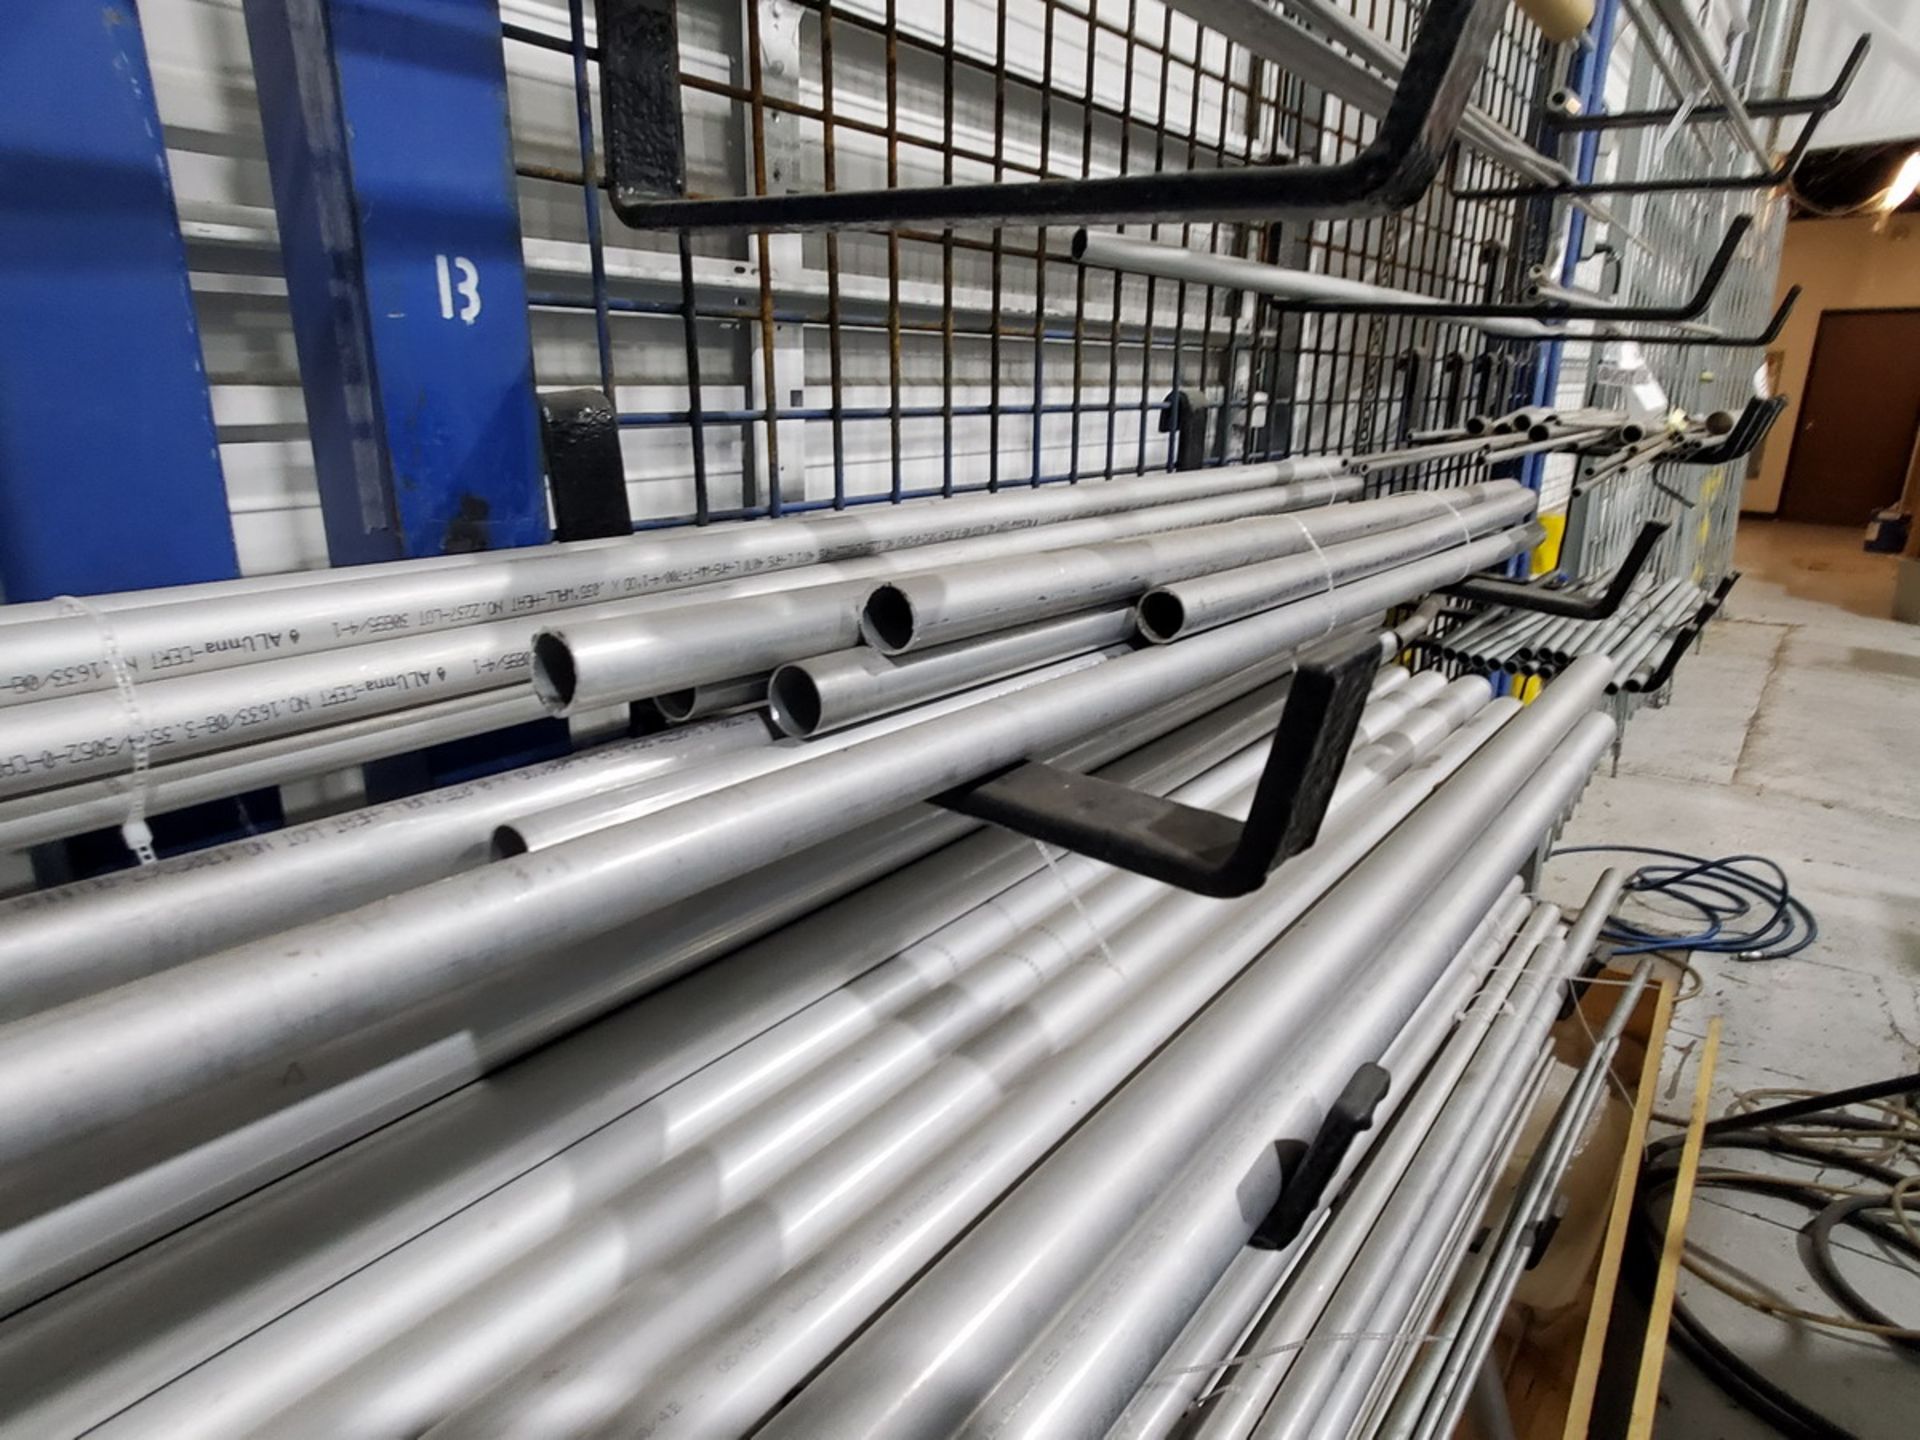 Assorted Aluminum Tubing O.D. Size Range: 1/4"-1-1/2", Length: 18"-12' (Racks Excluded) - Image 14 of 25